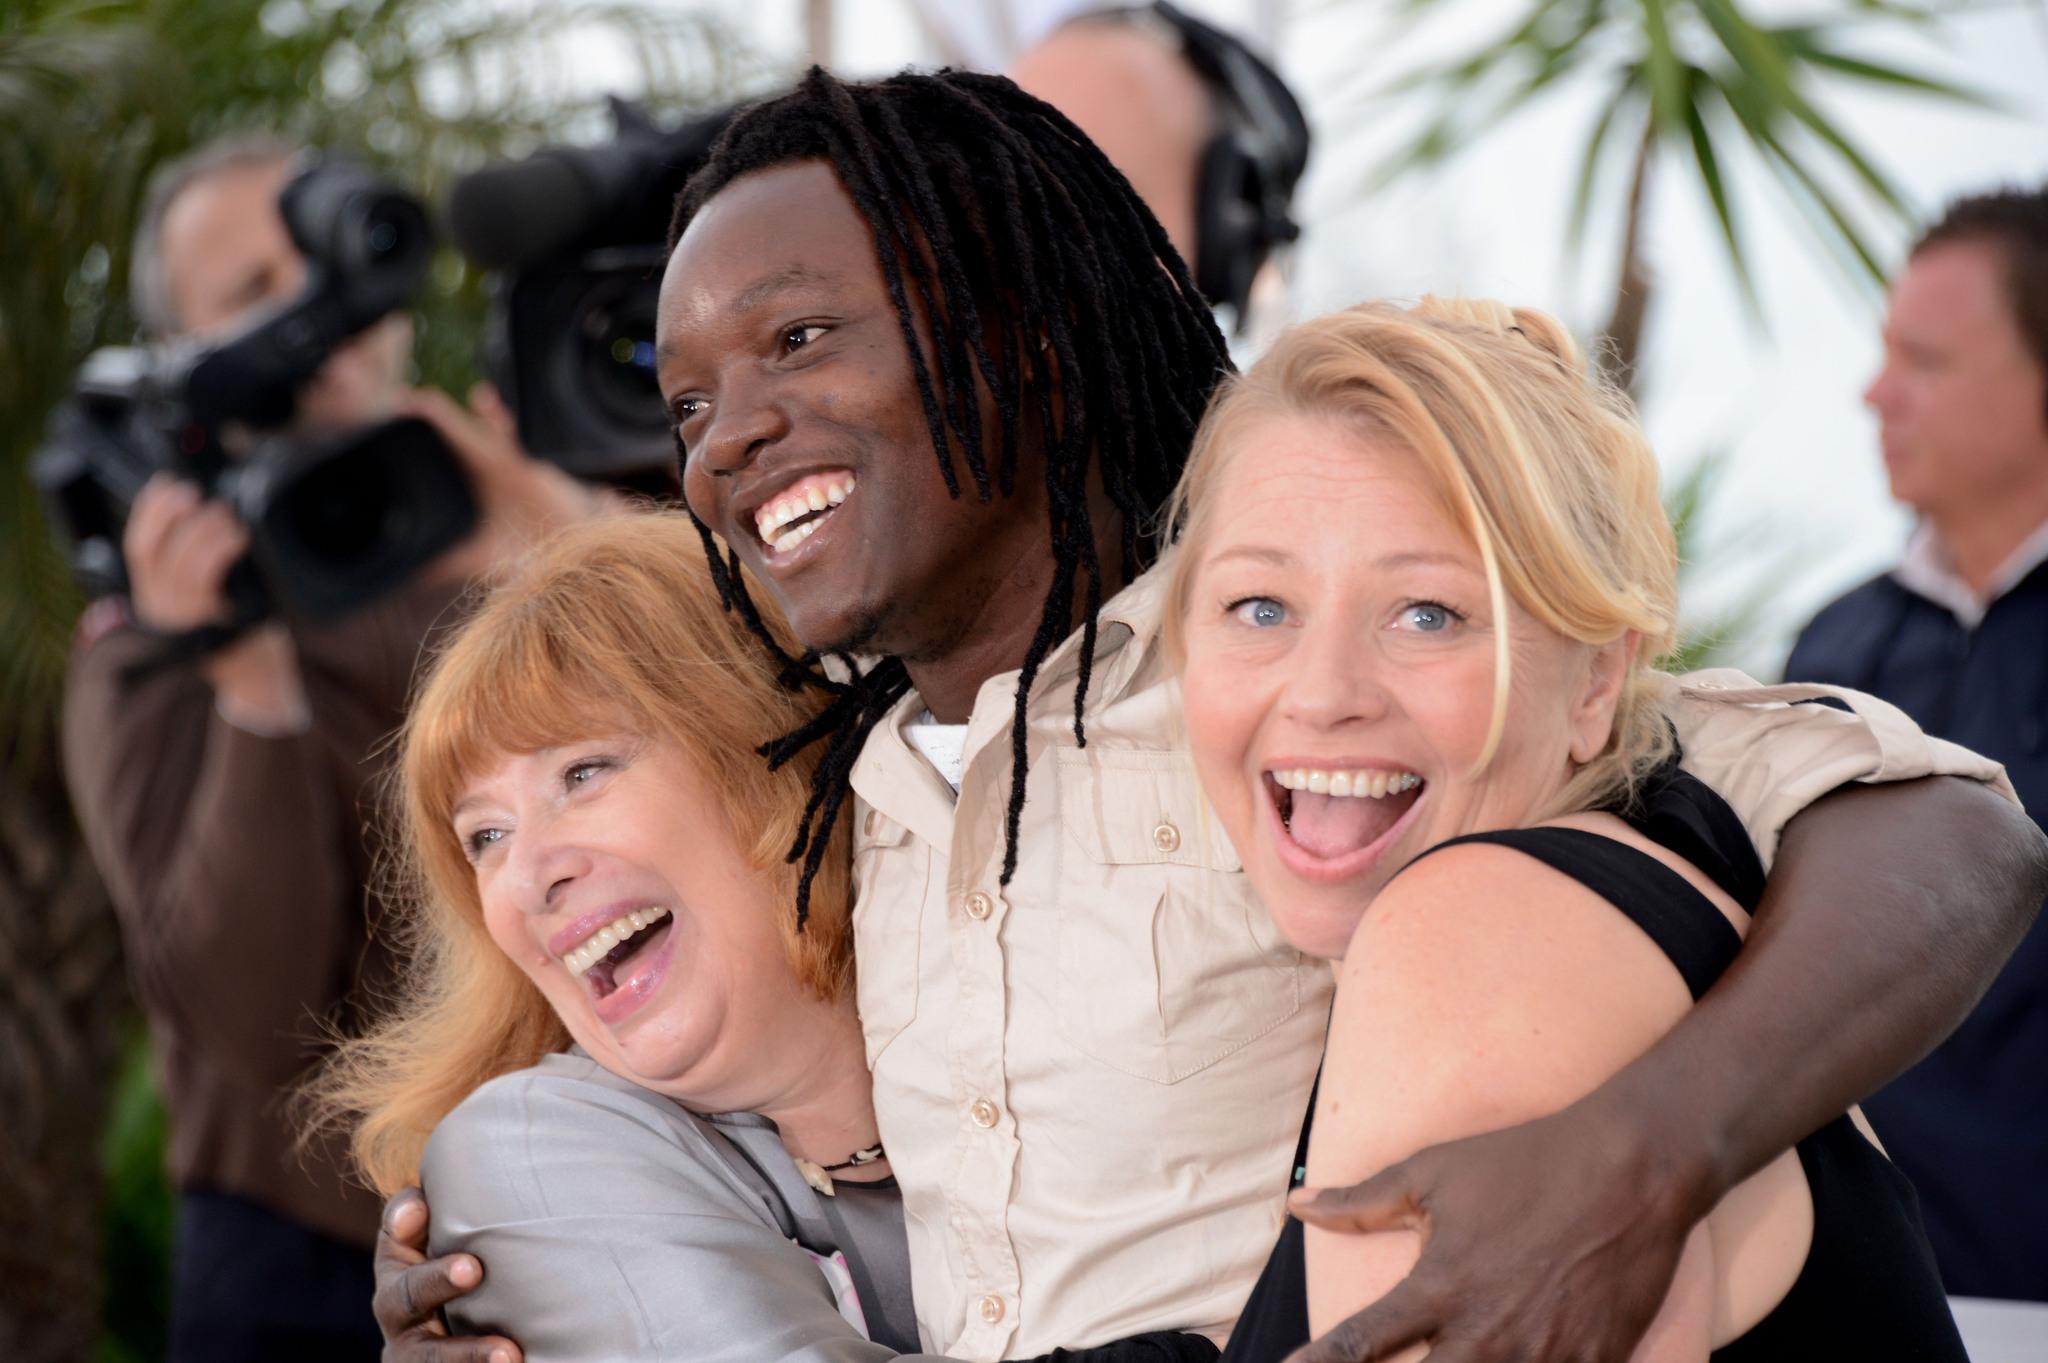 inge-maux-margarete-tiesel-and-peter-kazungu-at-event-of-paradise-love-2012-large-picture.jpg